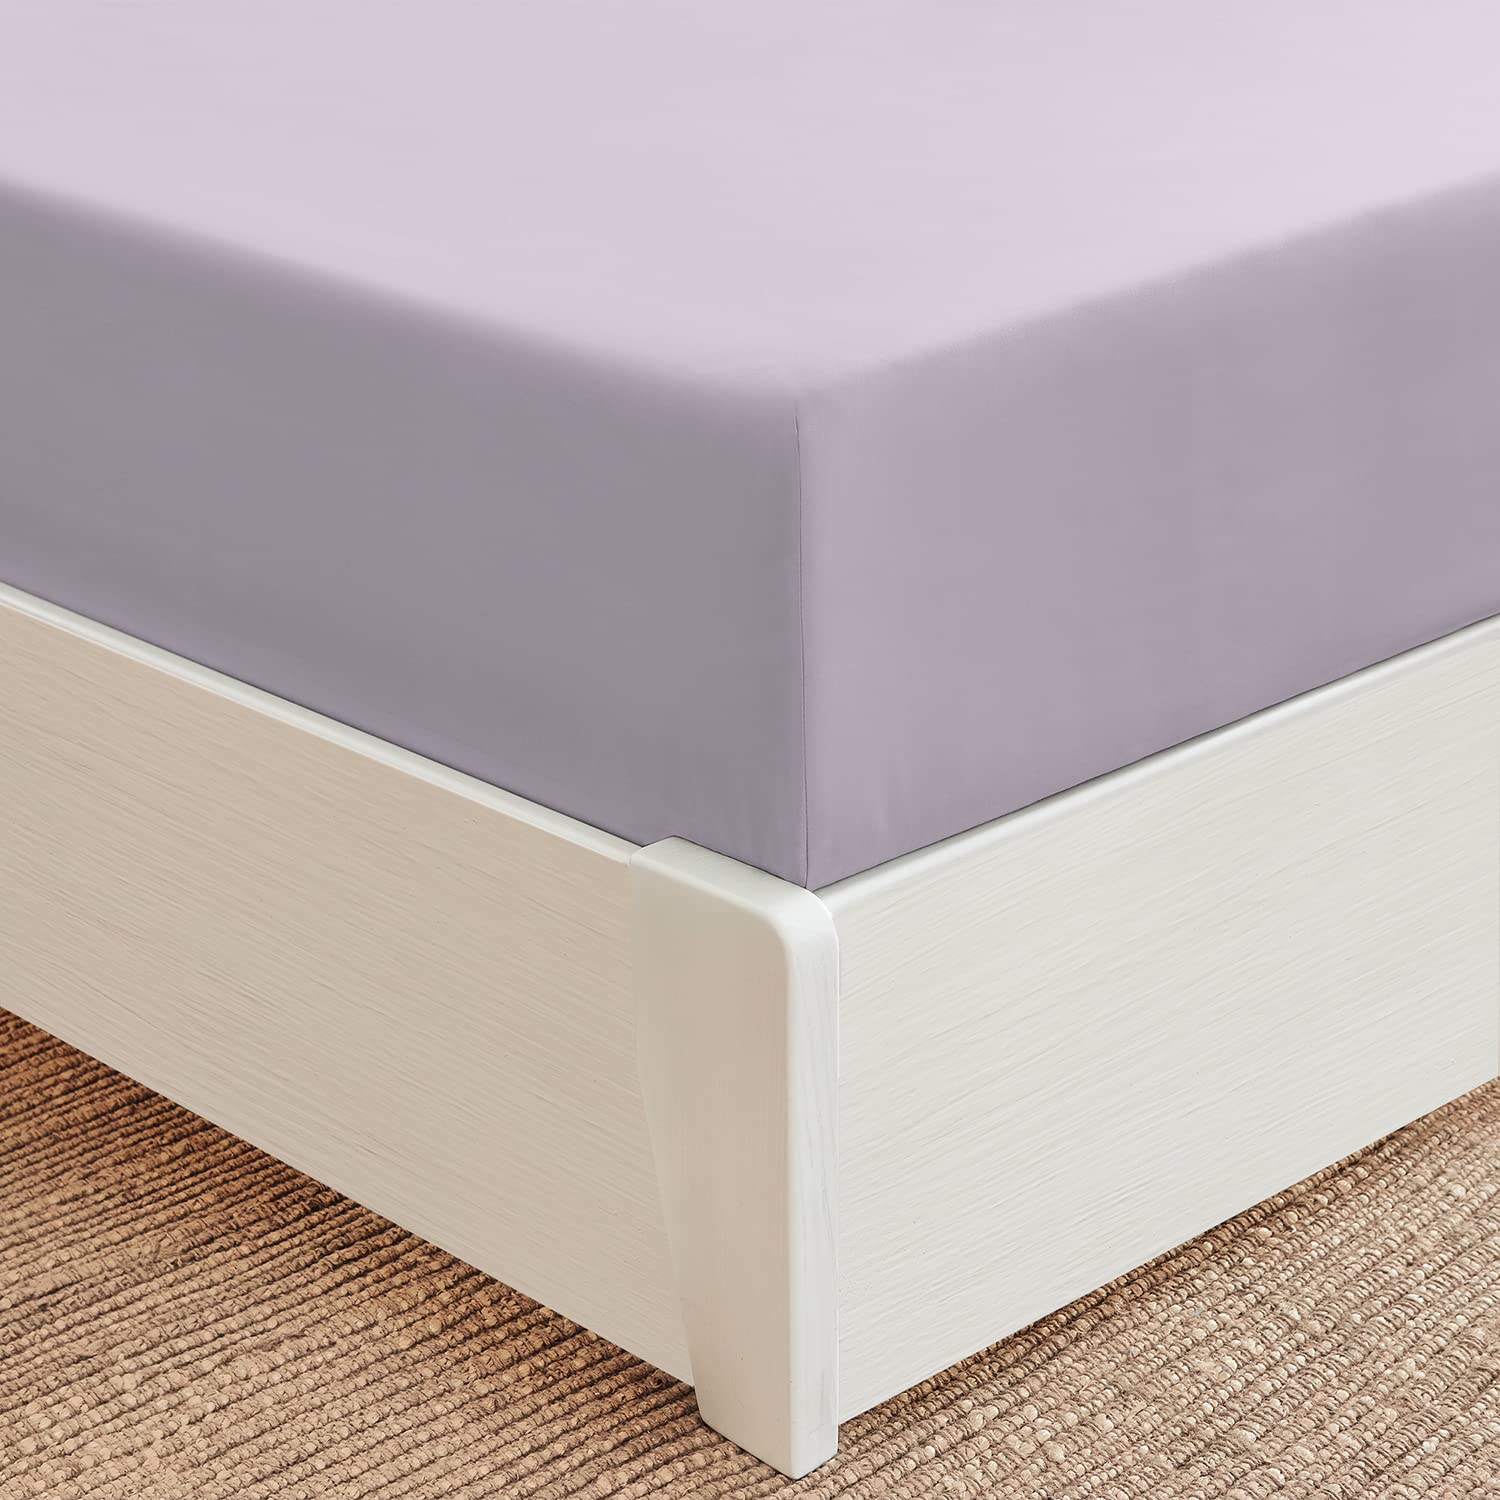 Book Cover Mellanni King Fitted Sheet Only - Iconic Collection Bedding Sheets - Soft & Cooling Sheets with up to 16 inch Deep Pocket - All Around Elastic - Wrinkle, Fade, Stain Resistant - 1 PC (King, Lavender) King Lavender